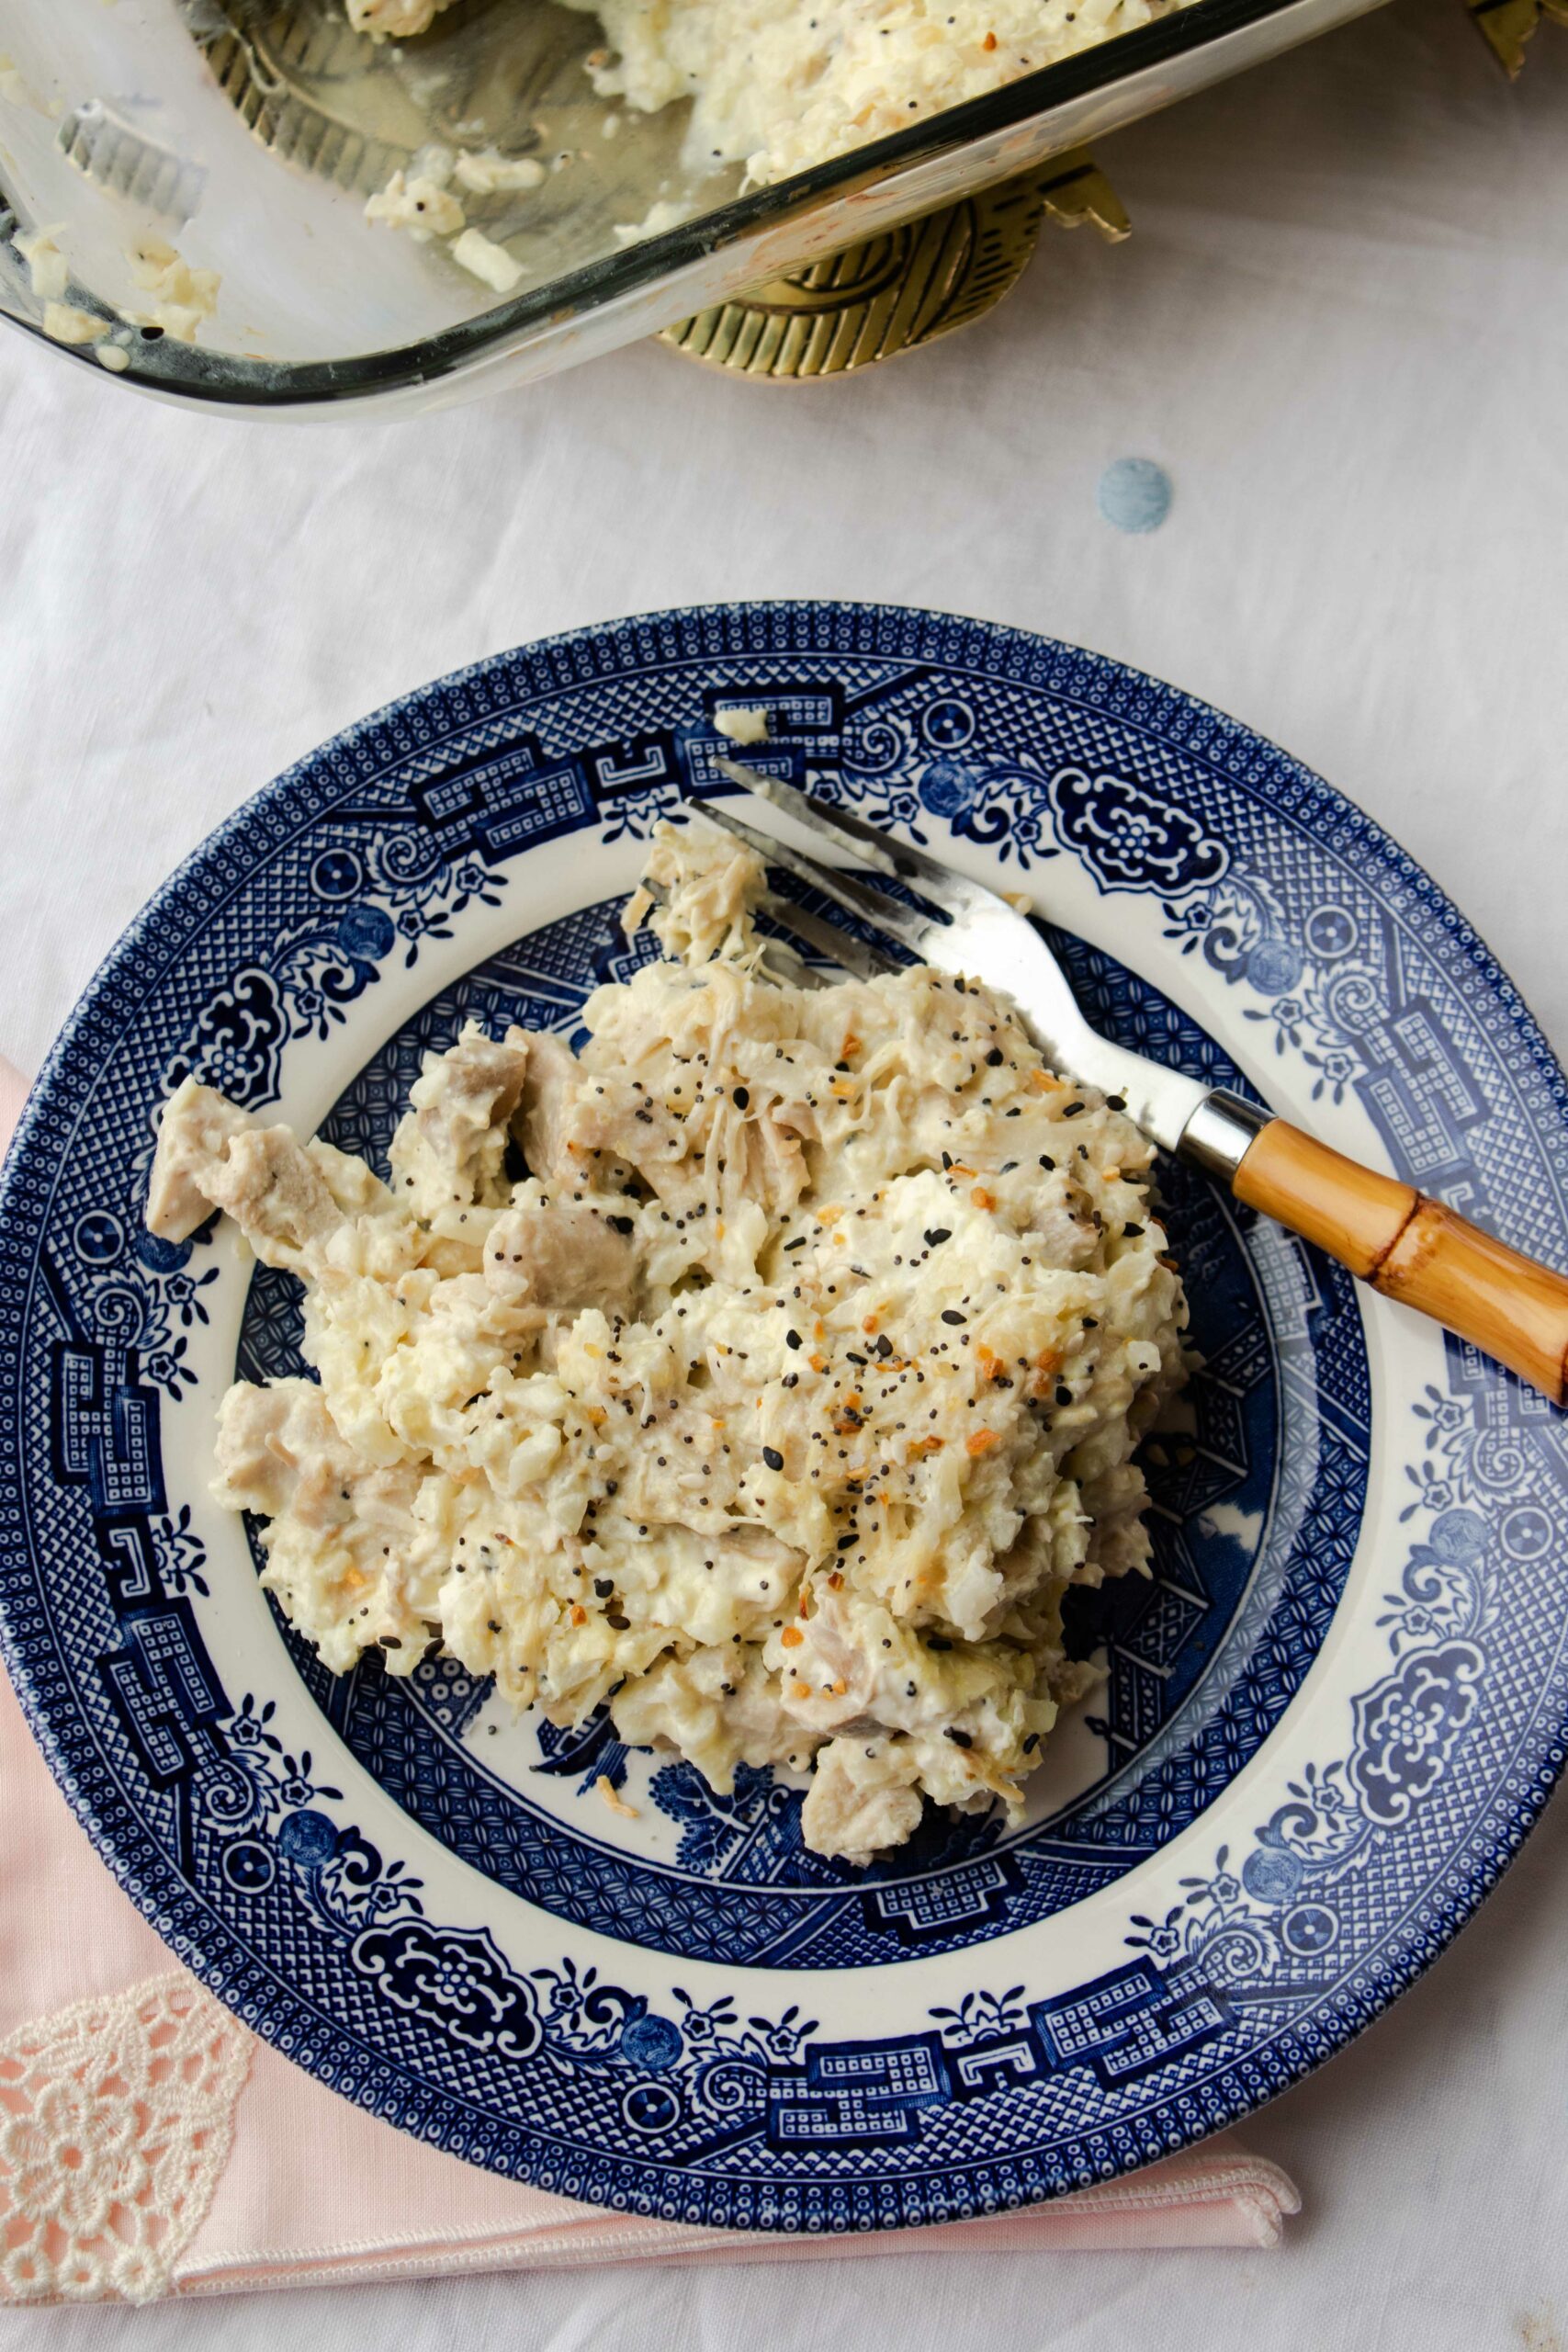 Everyone's favorite bagel seasoning shines in this low carb casserole with chicken and cauliflower rice. Use precooked chicken for an easy low carb dinner that's ready in a flash. This keto chicken casserole with cauliflower rice is picky eater approved!